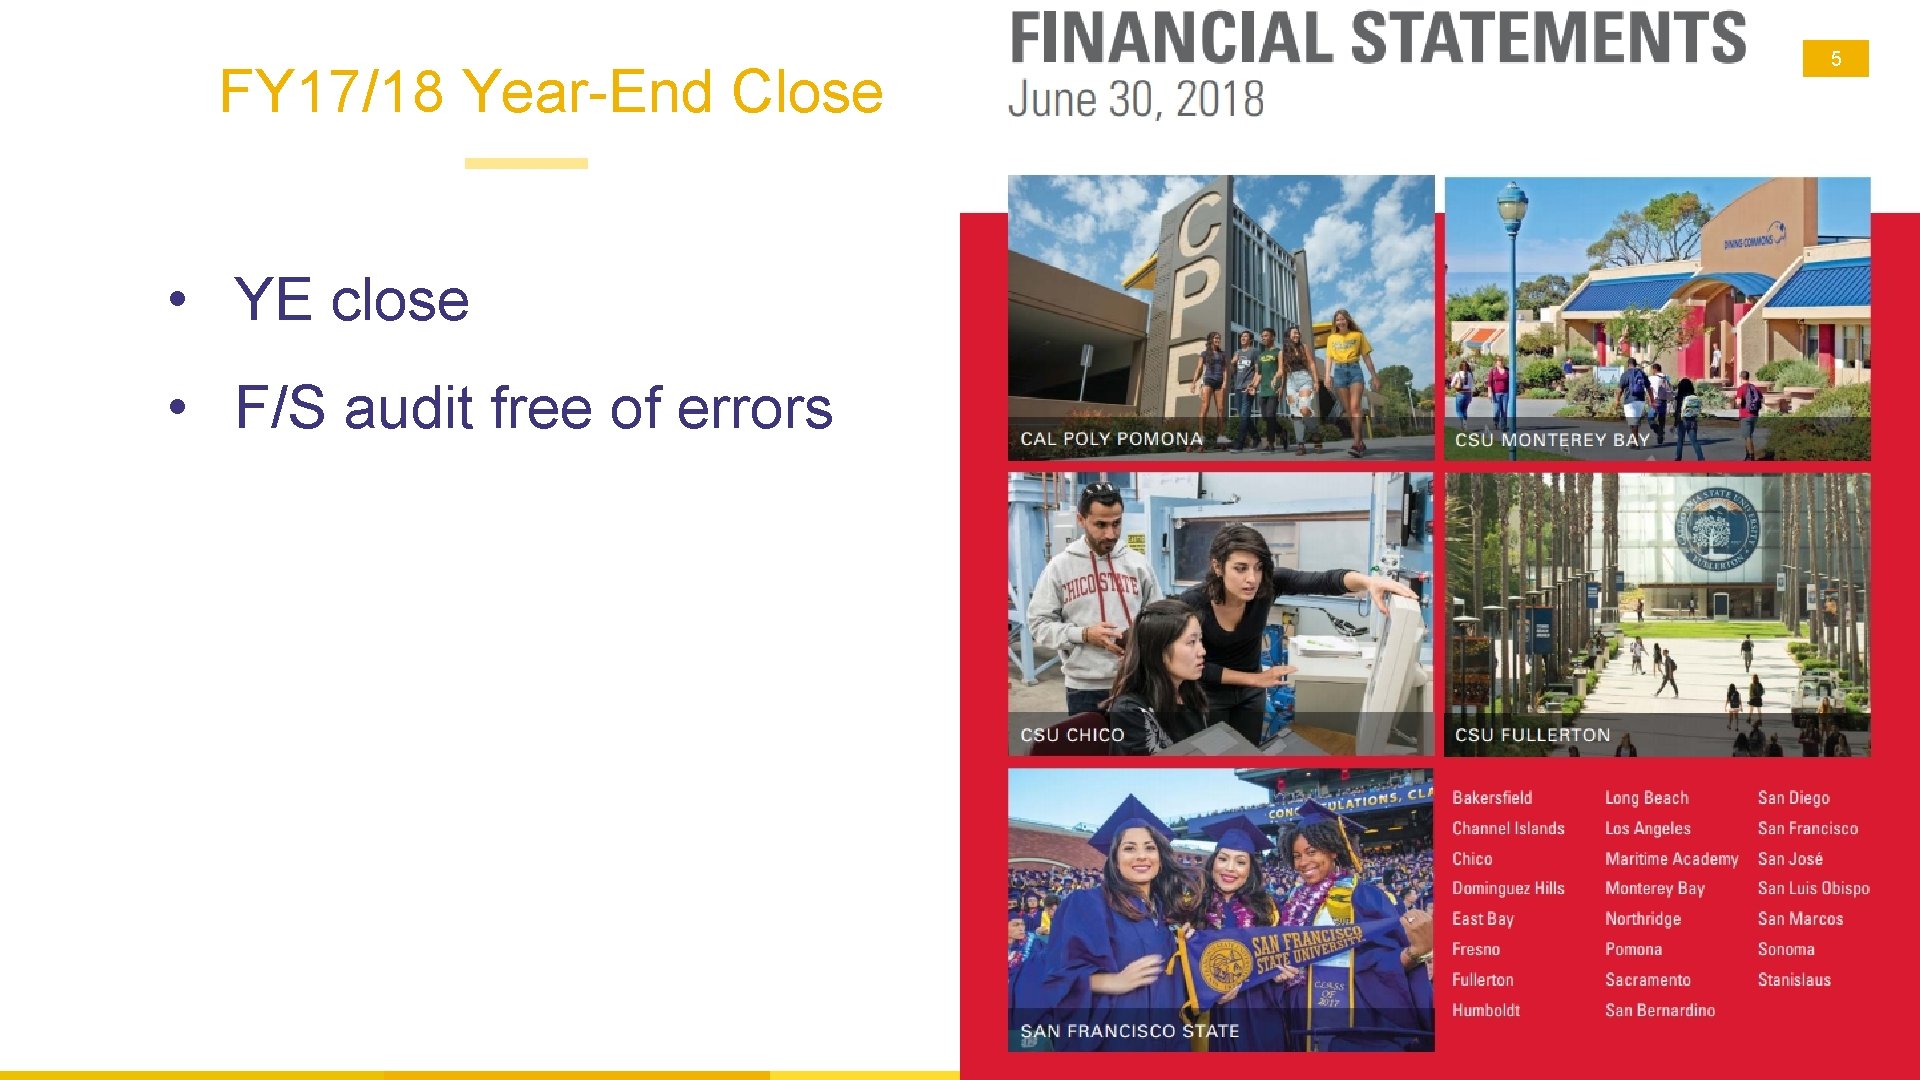 FY 17/18 Year-End Close • YE close • F/S audit free of errors 5